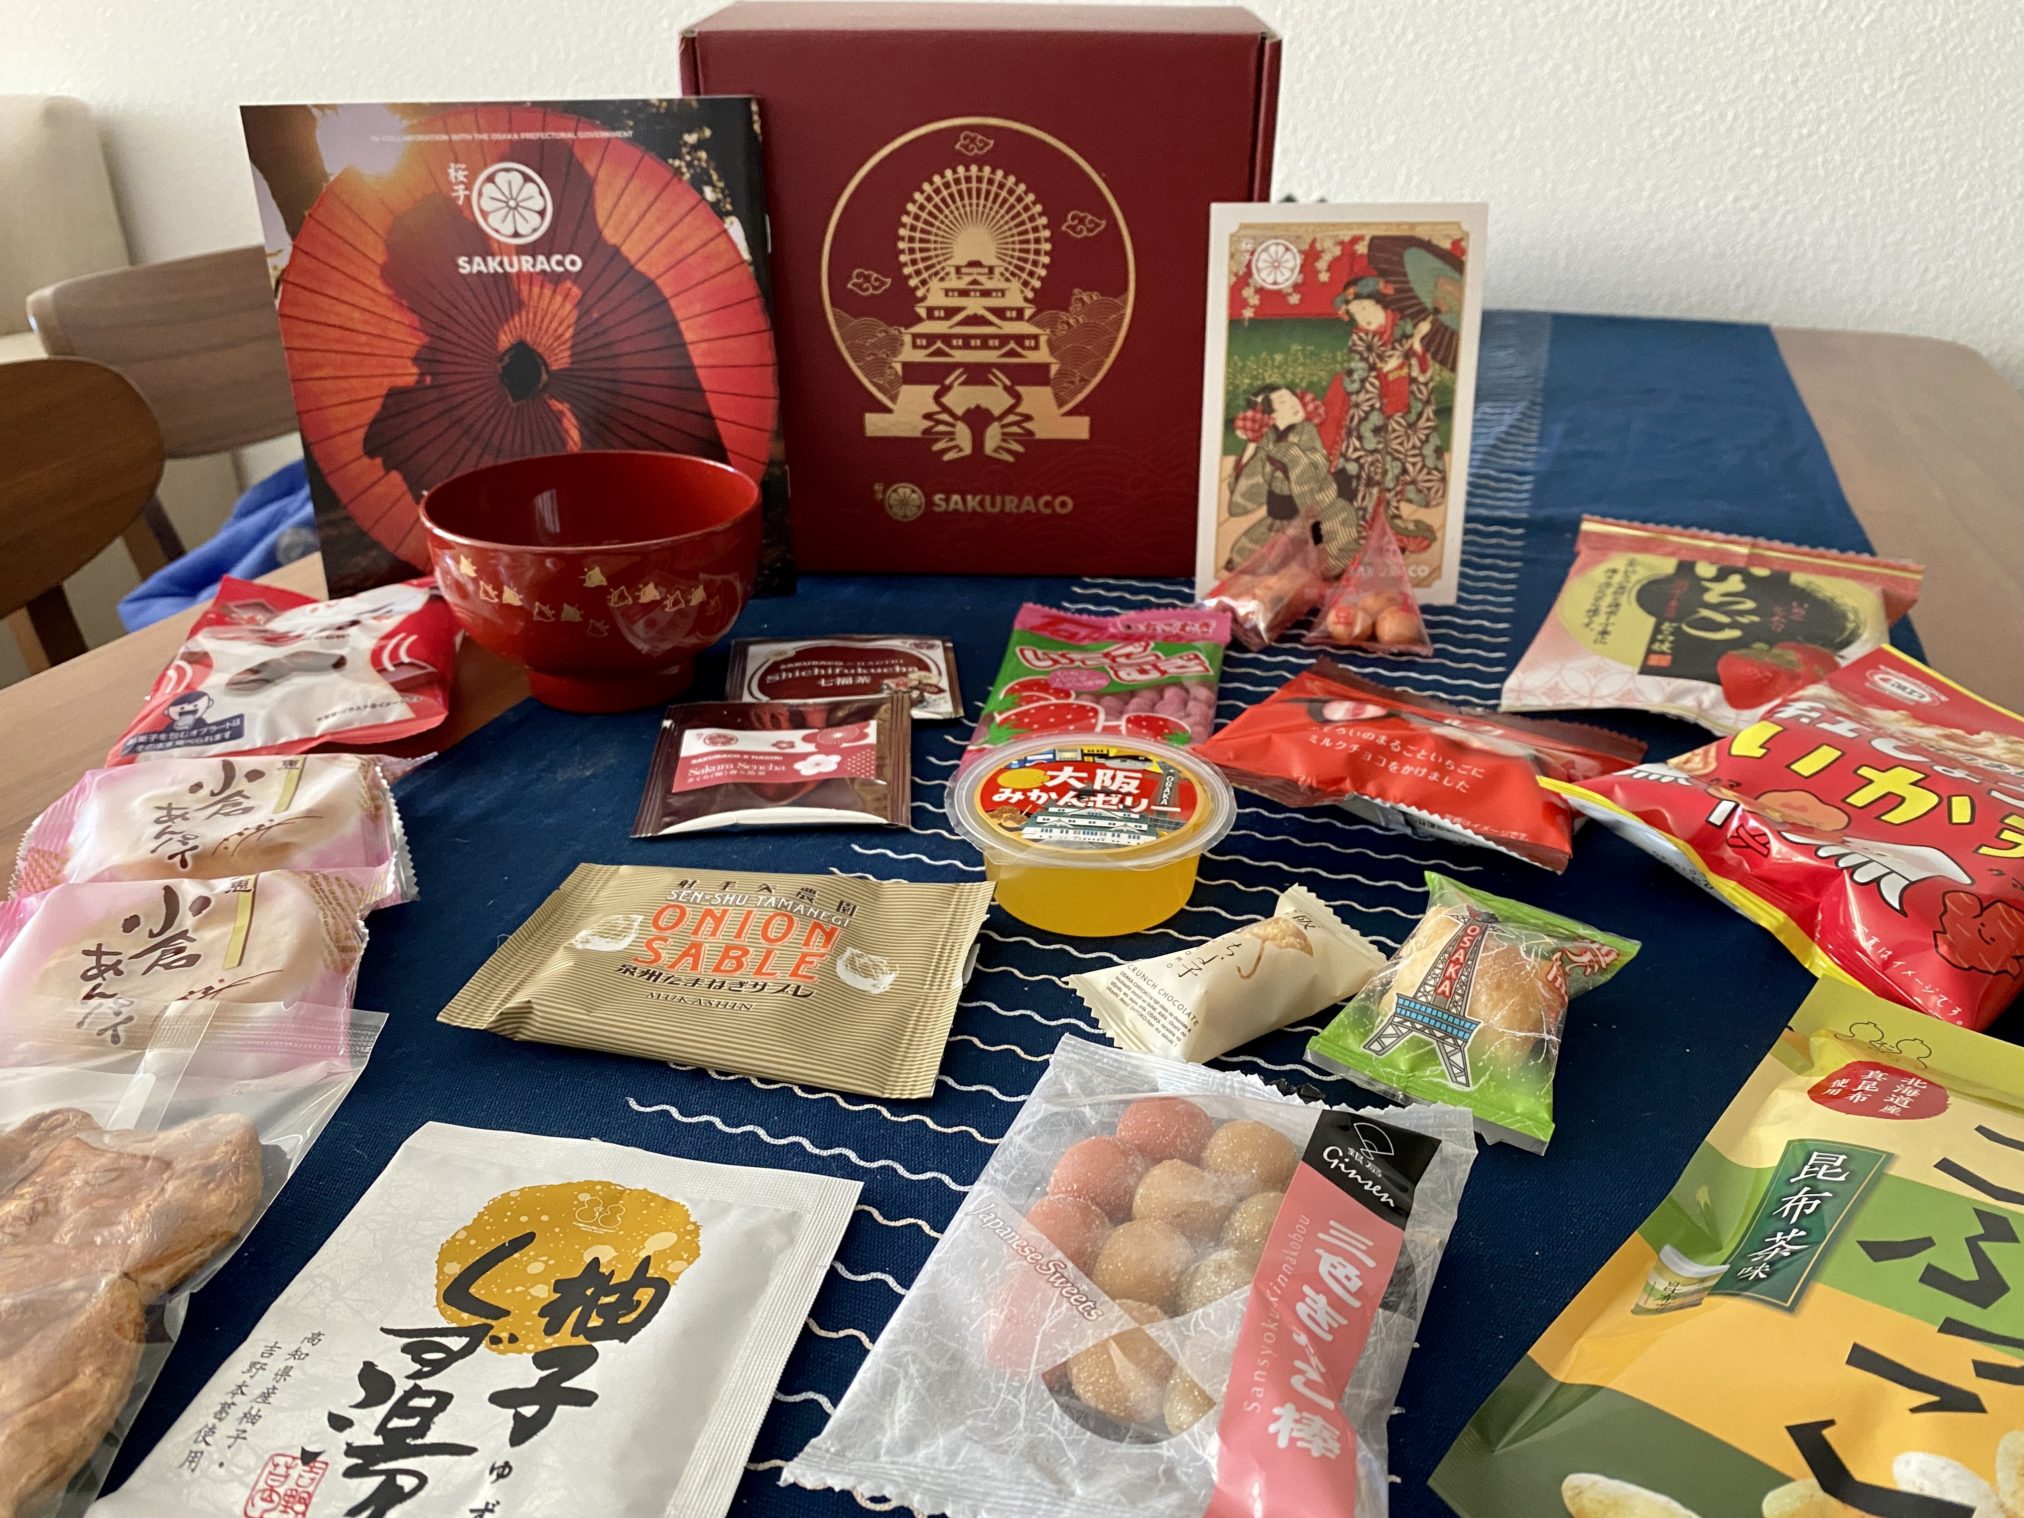 Sakuraco Review - Is This Japanese Snack Box Worth The Money?